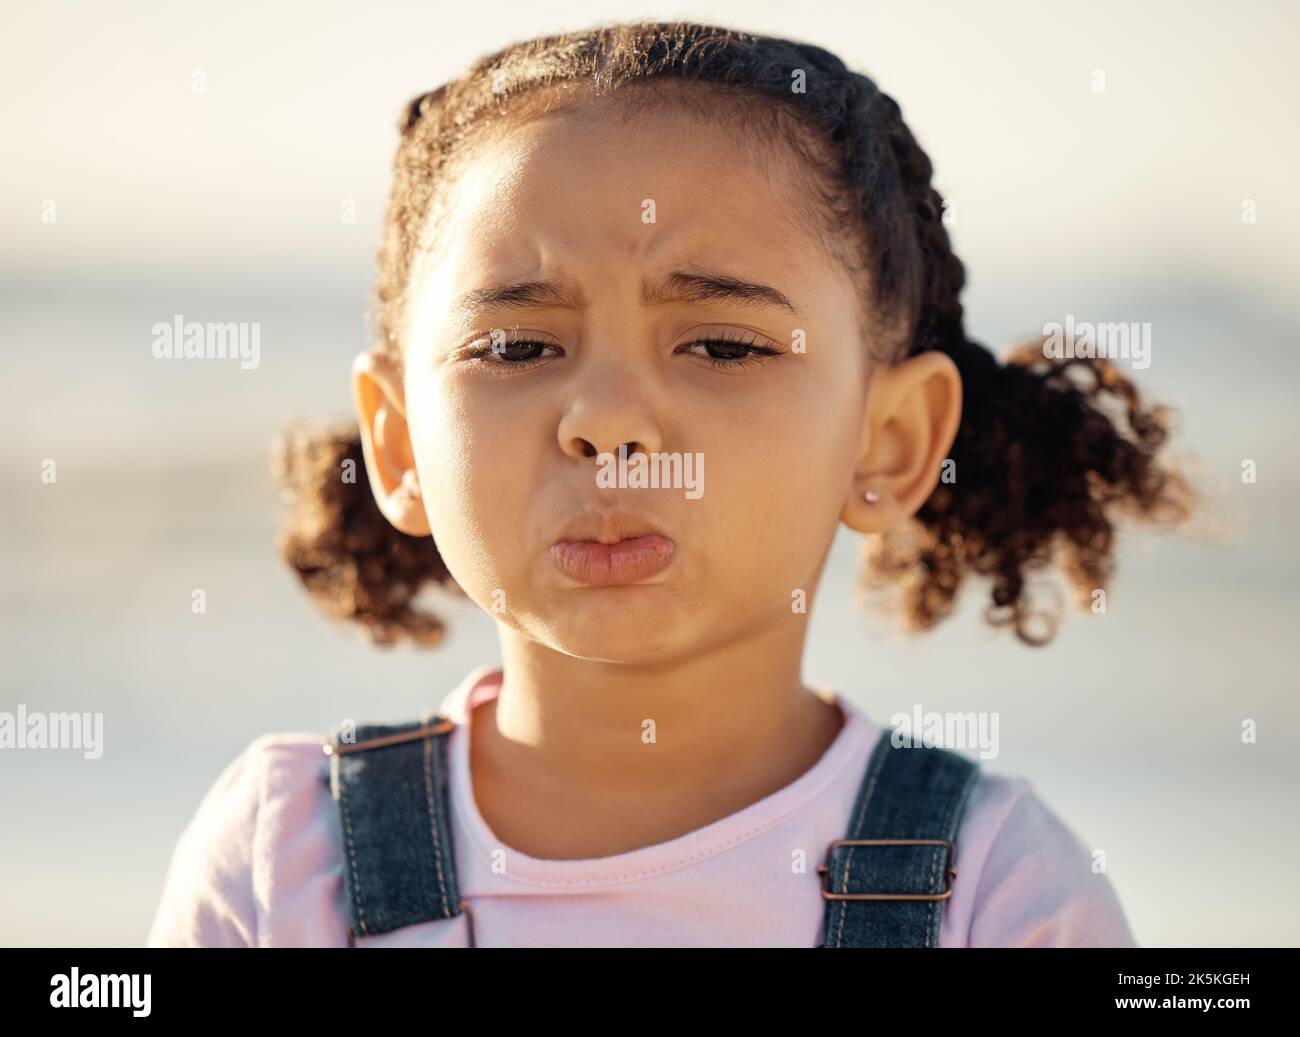 Portrait, sad and face of an unhappy little girl feeling lonely or upset against a blurred background. Closeup of an emotional African female child Stock Photo